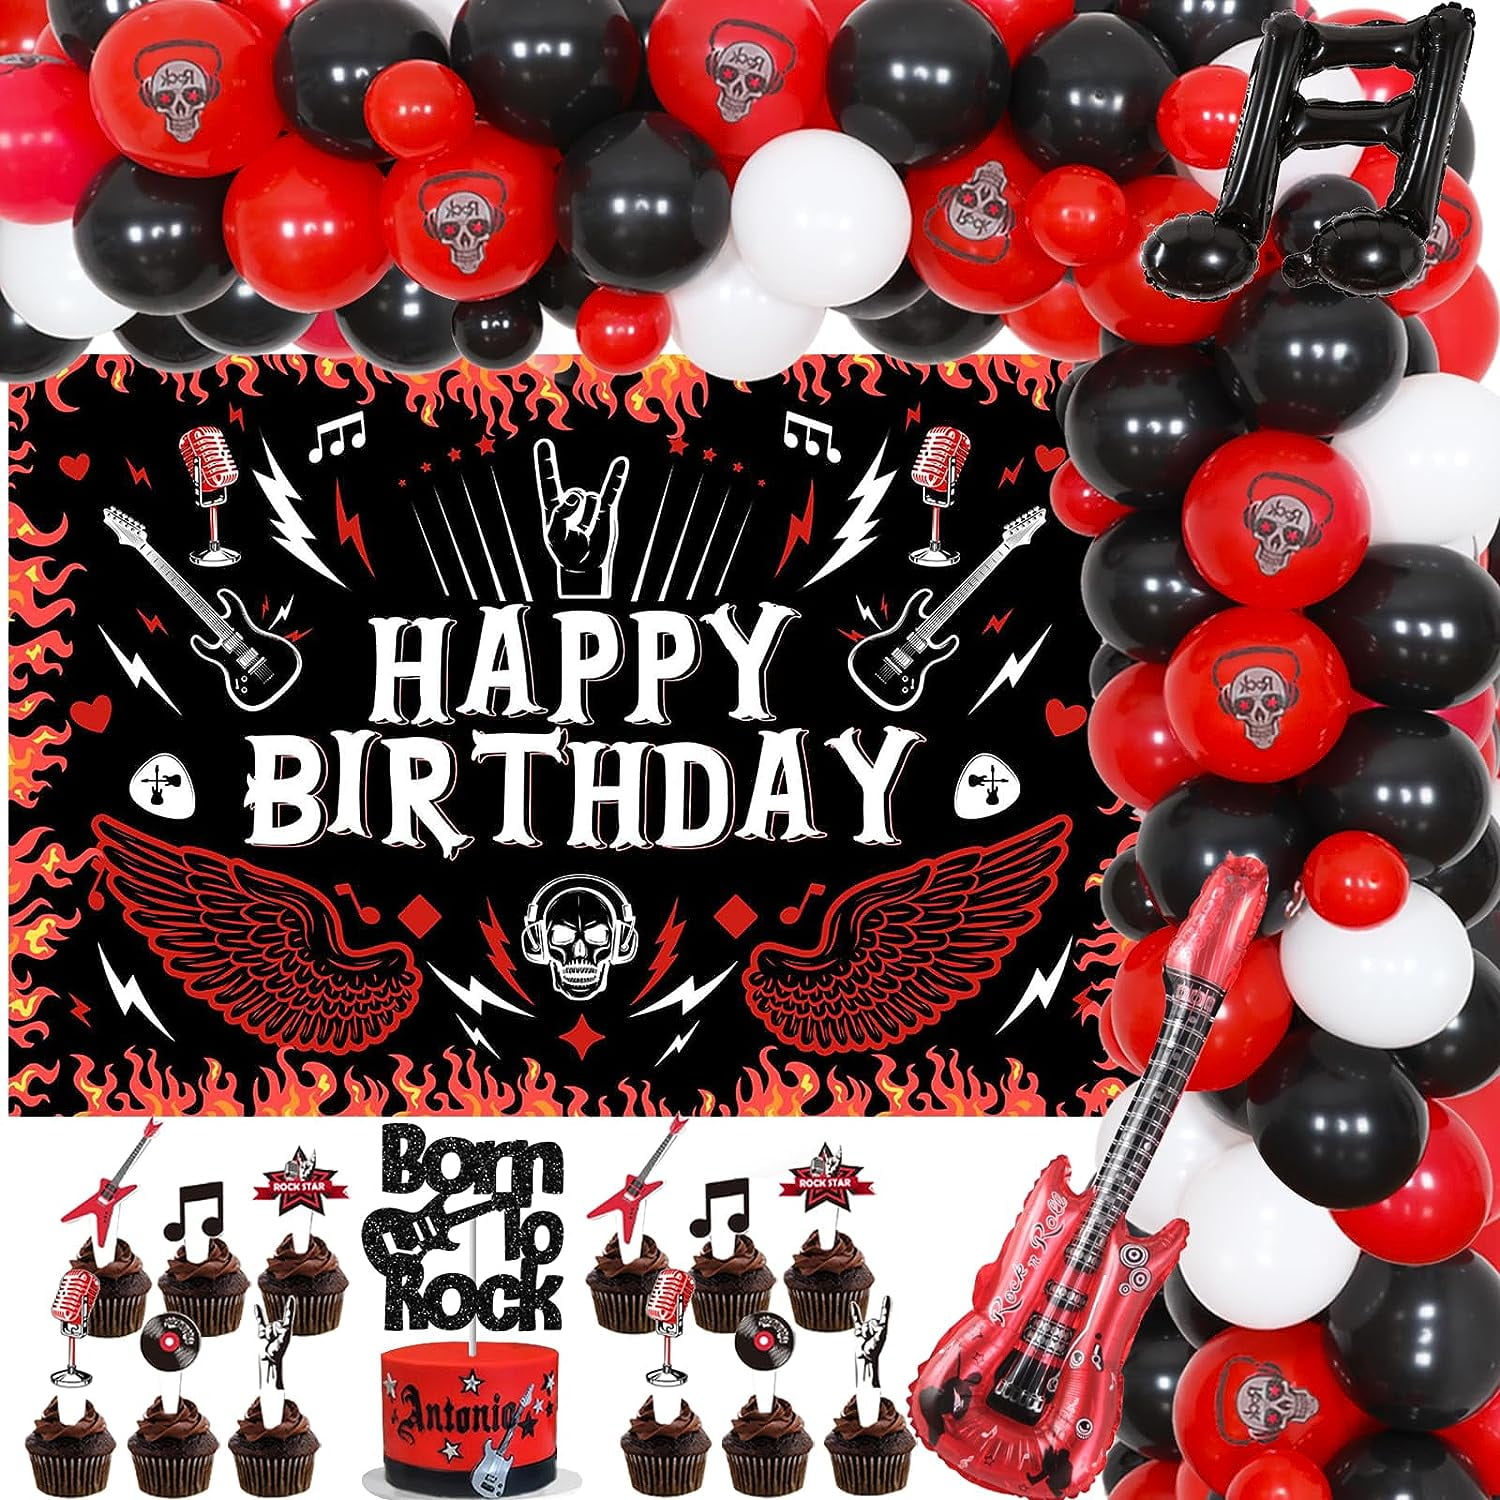 Rock and Roll Party Decorations, Music Happy Birthday Backdrop Red Black  White Balloons Garland Arch Kit Born to Rock Cake Cupcake Topper Guitar  Music